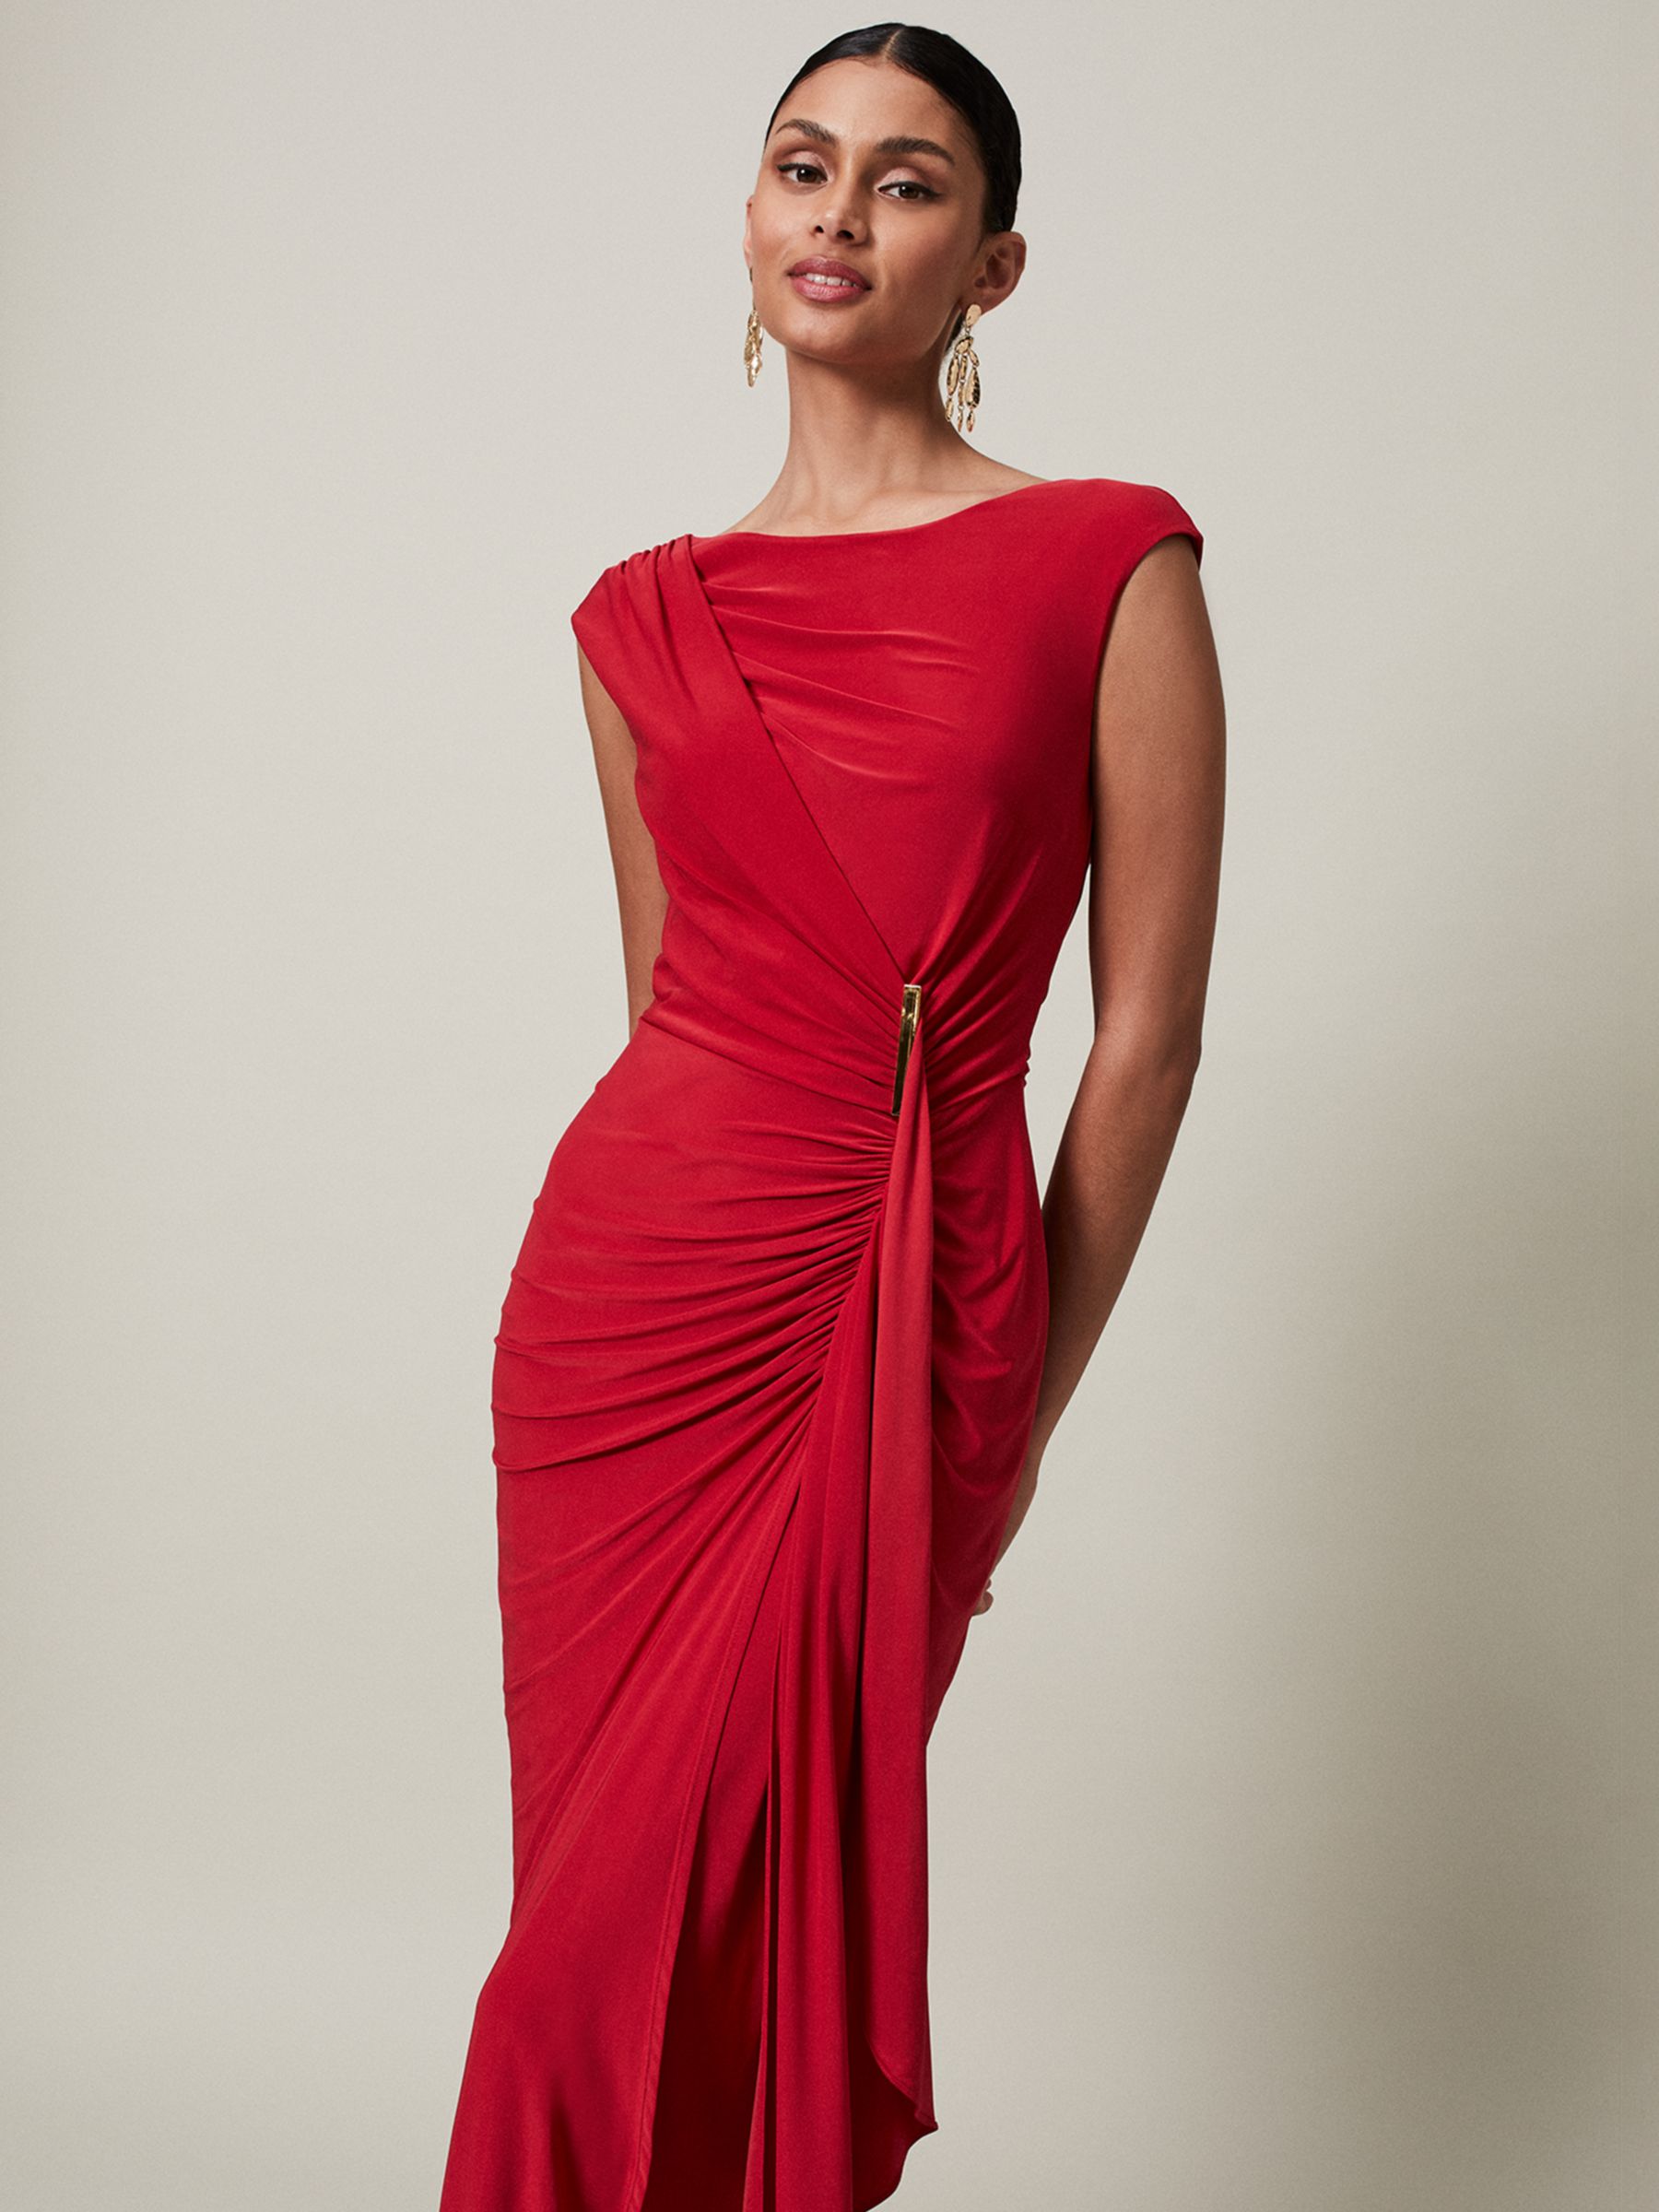 Phase Eight Donna Ruched Maxi Dress, Scarlet, 6